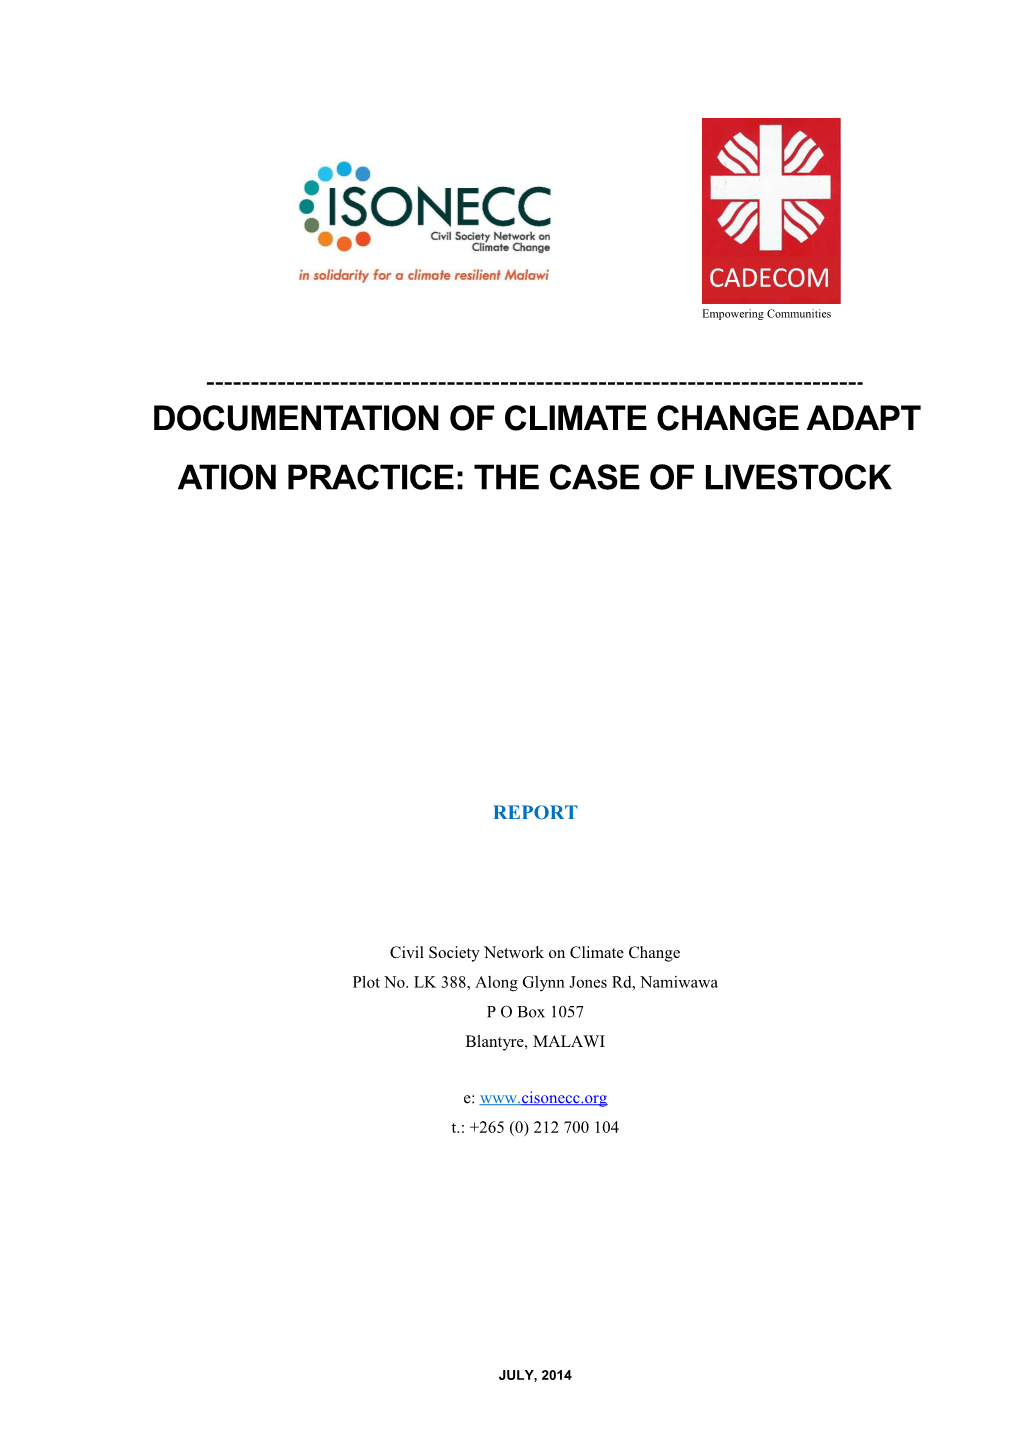 Documentation of Climate Change Adaptation Practice: the Case of Livestock